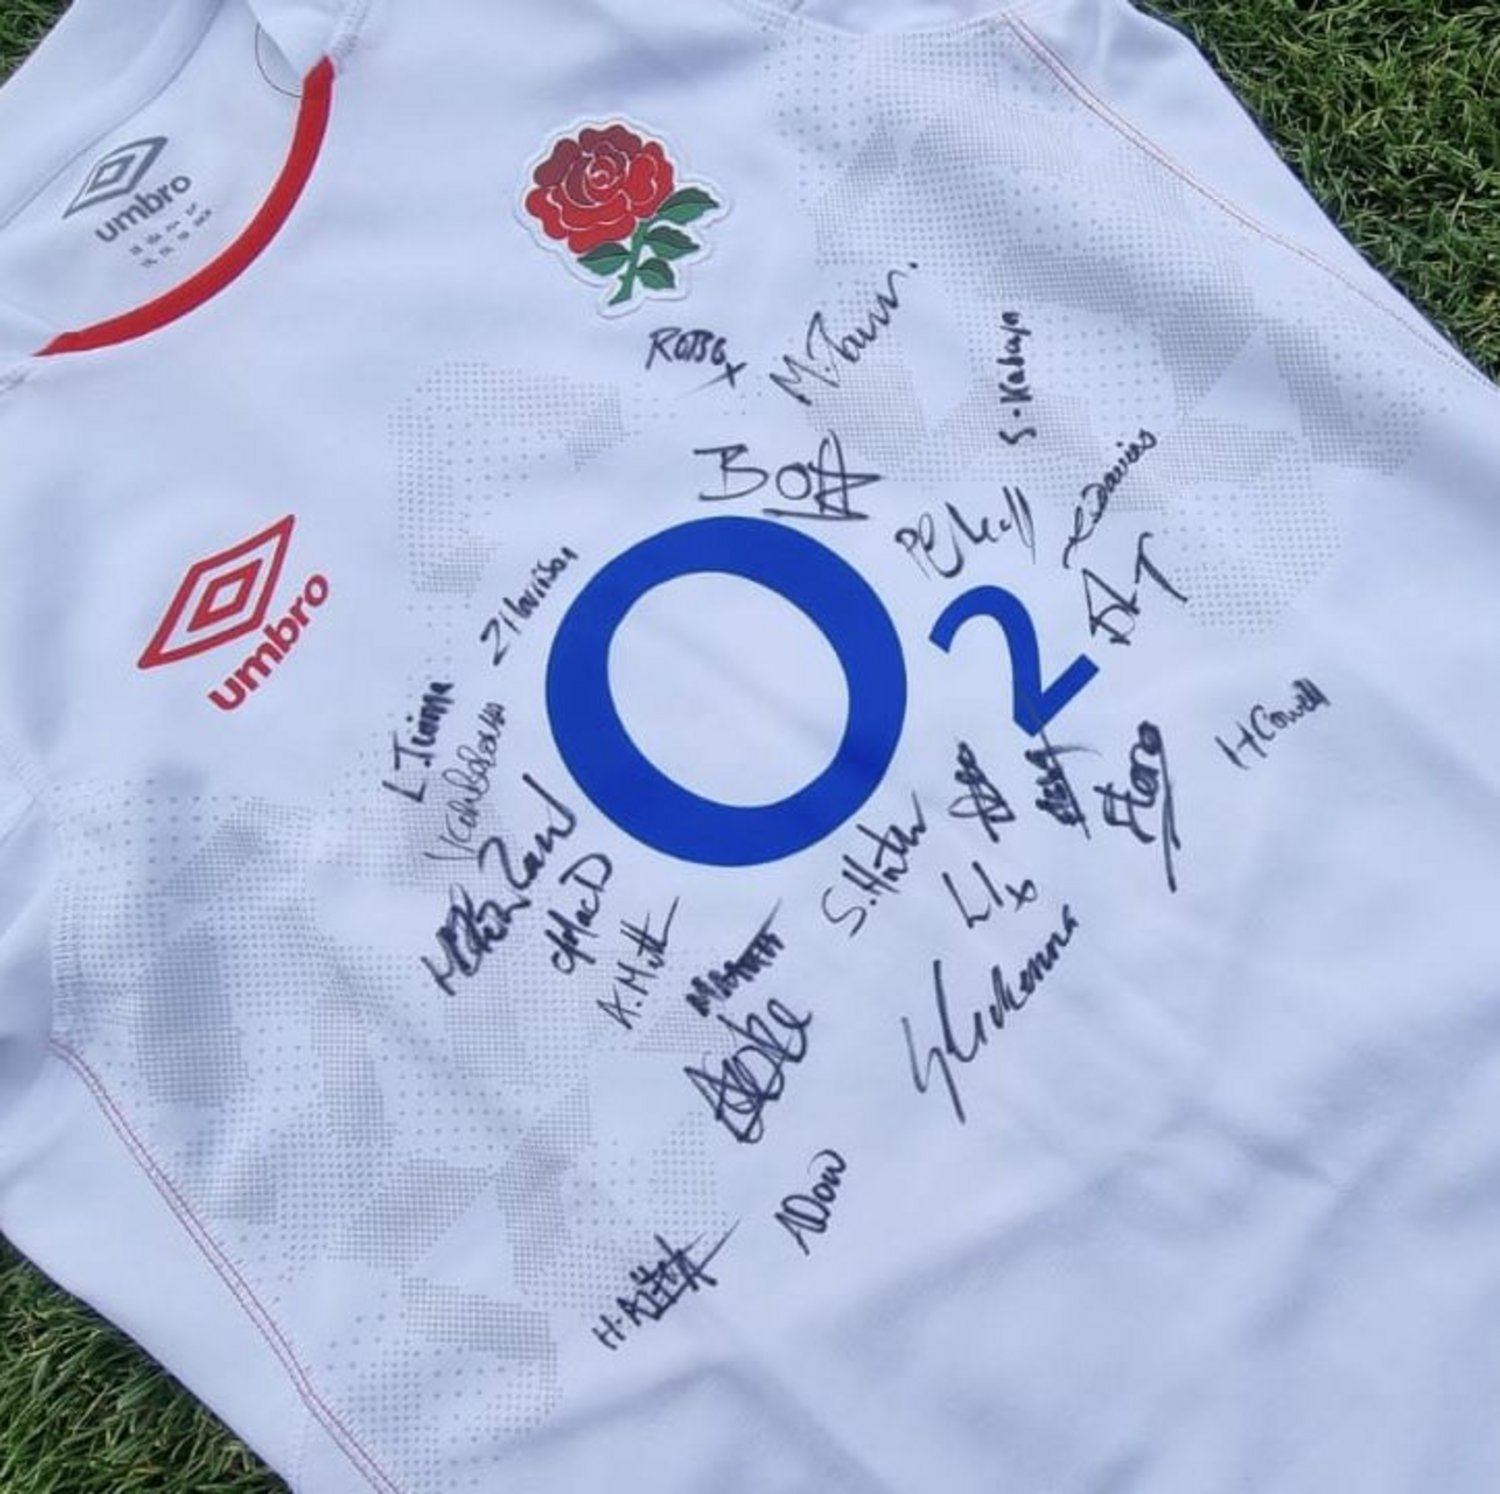 Bid now to be in with a chance of winning a signed Red Roses shirt.